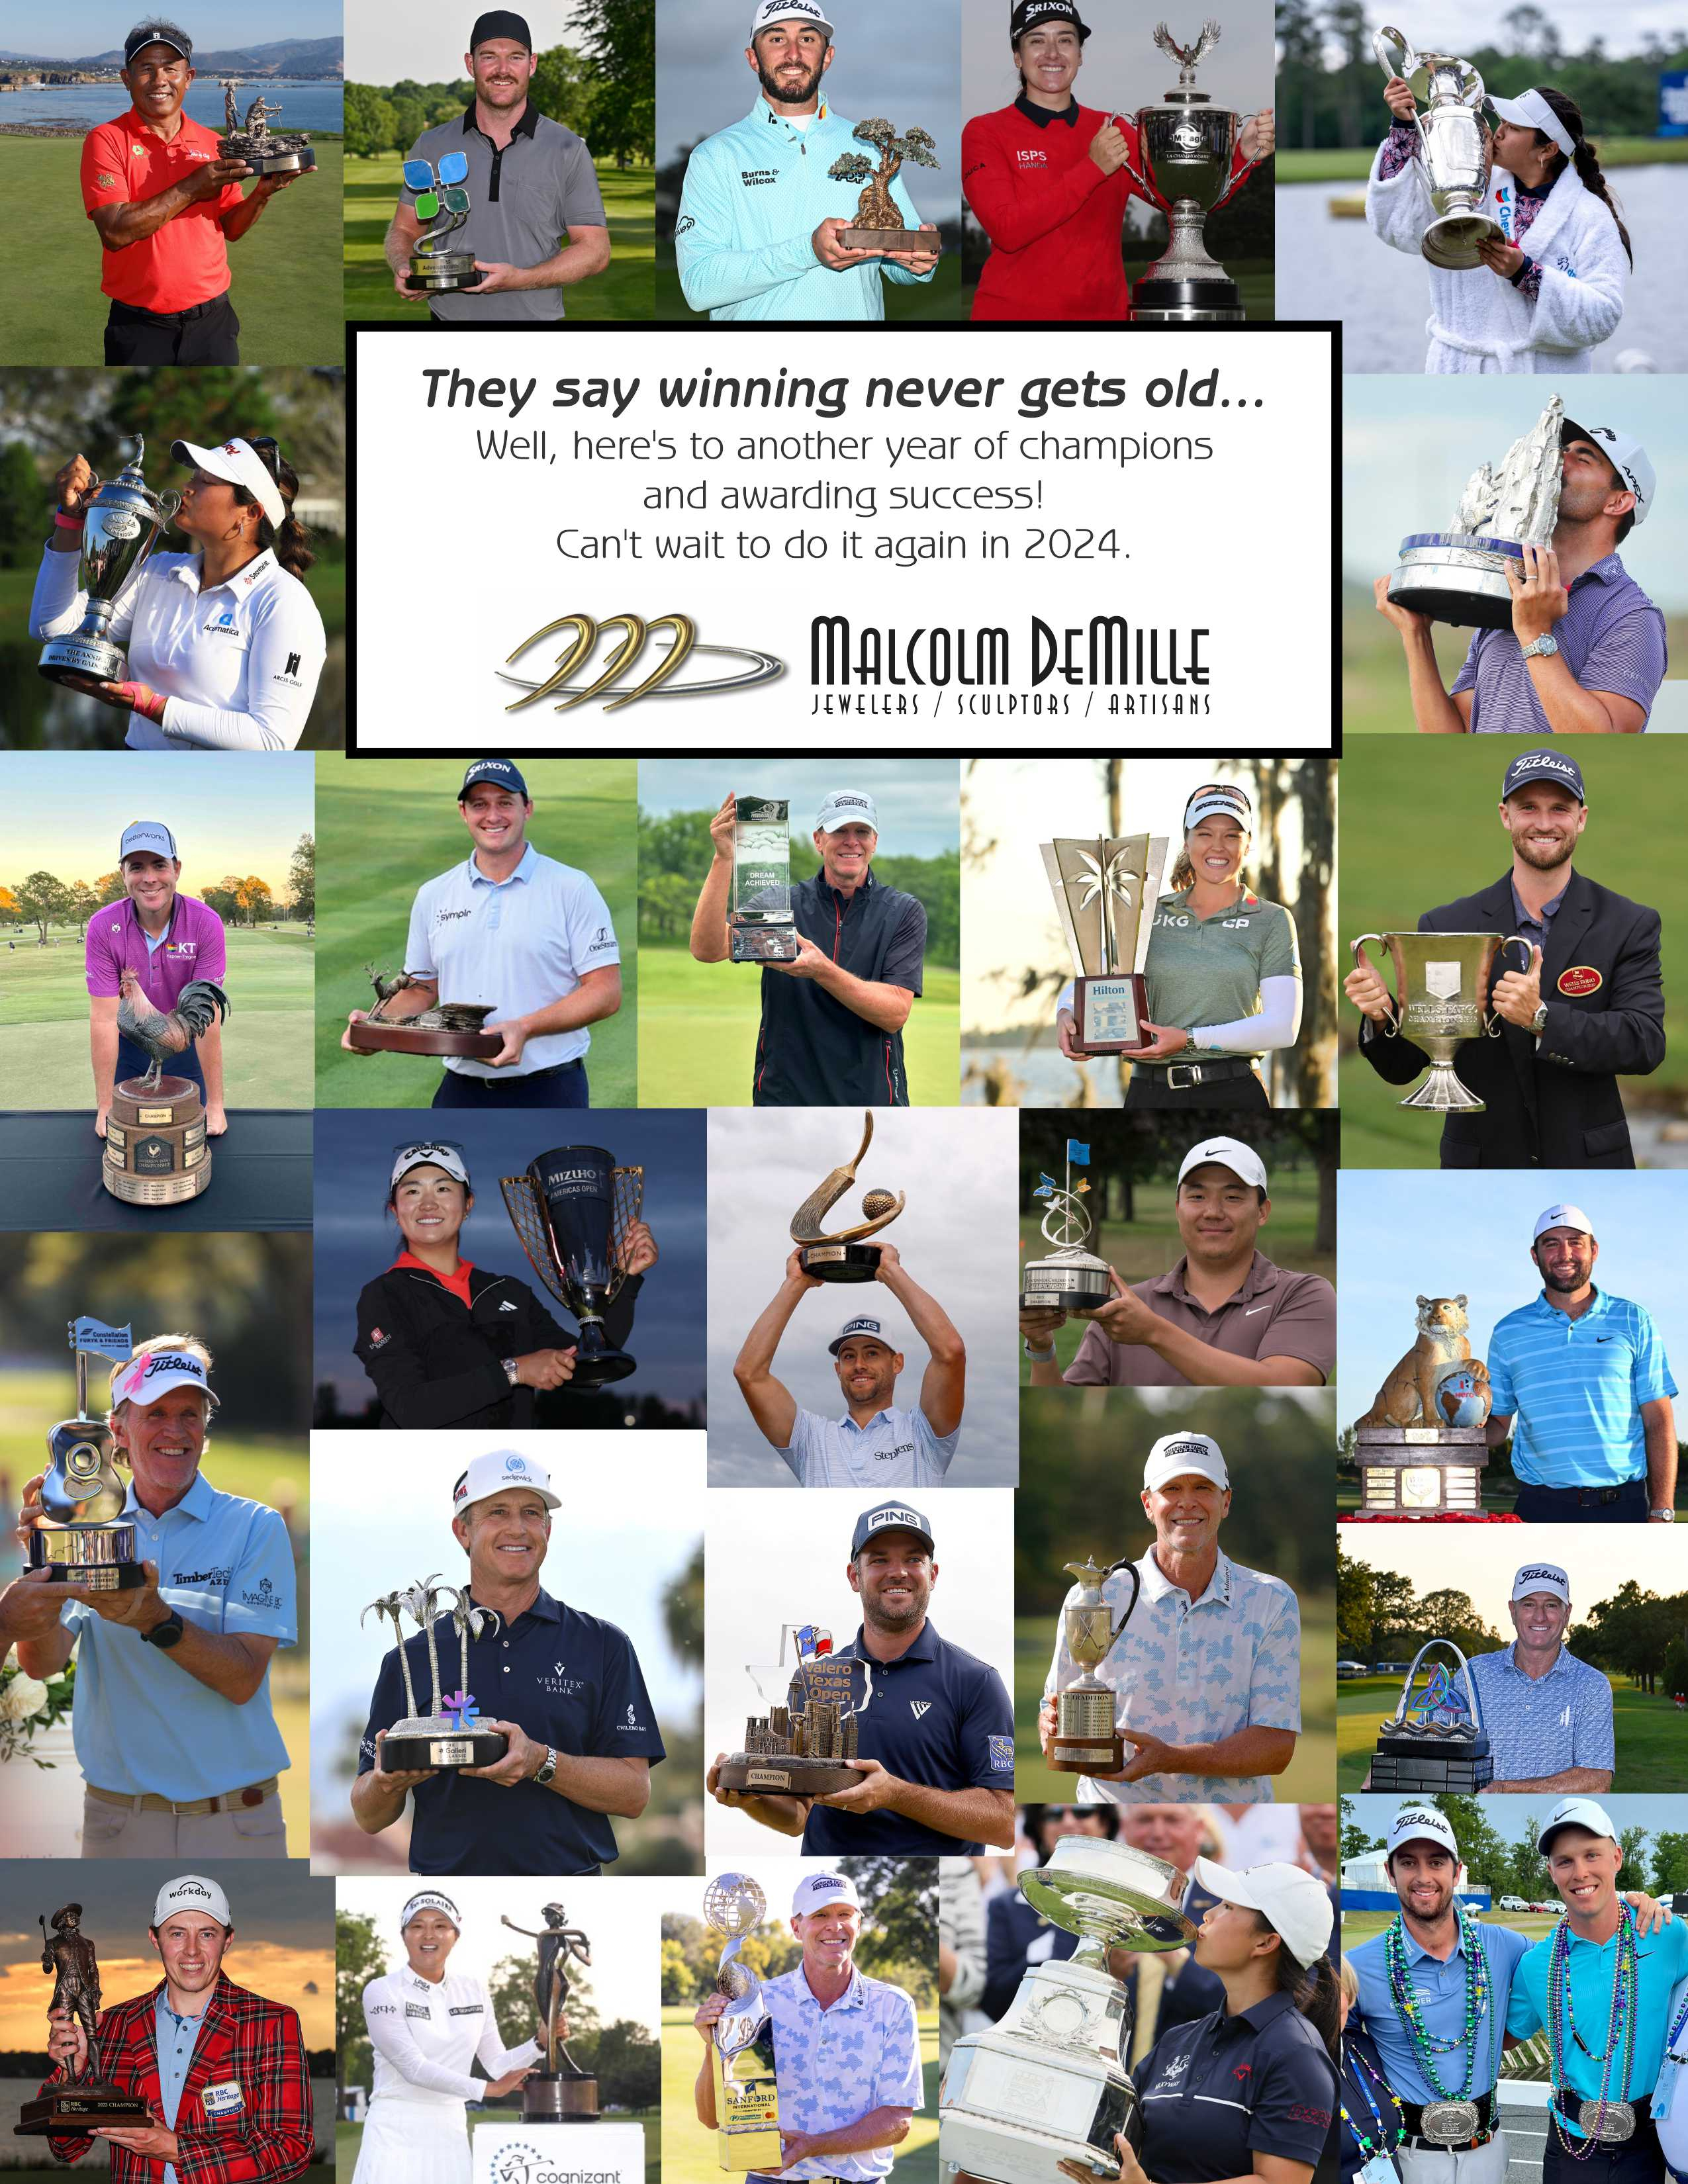 2023 Champions holding PGA, LPGA, Champions, Korn Ferry Tour trophies made by Malcolm DeMille